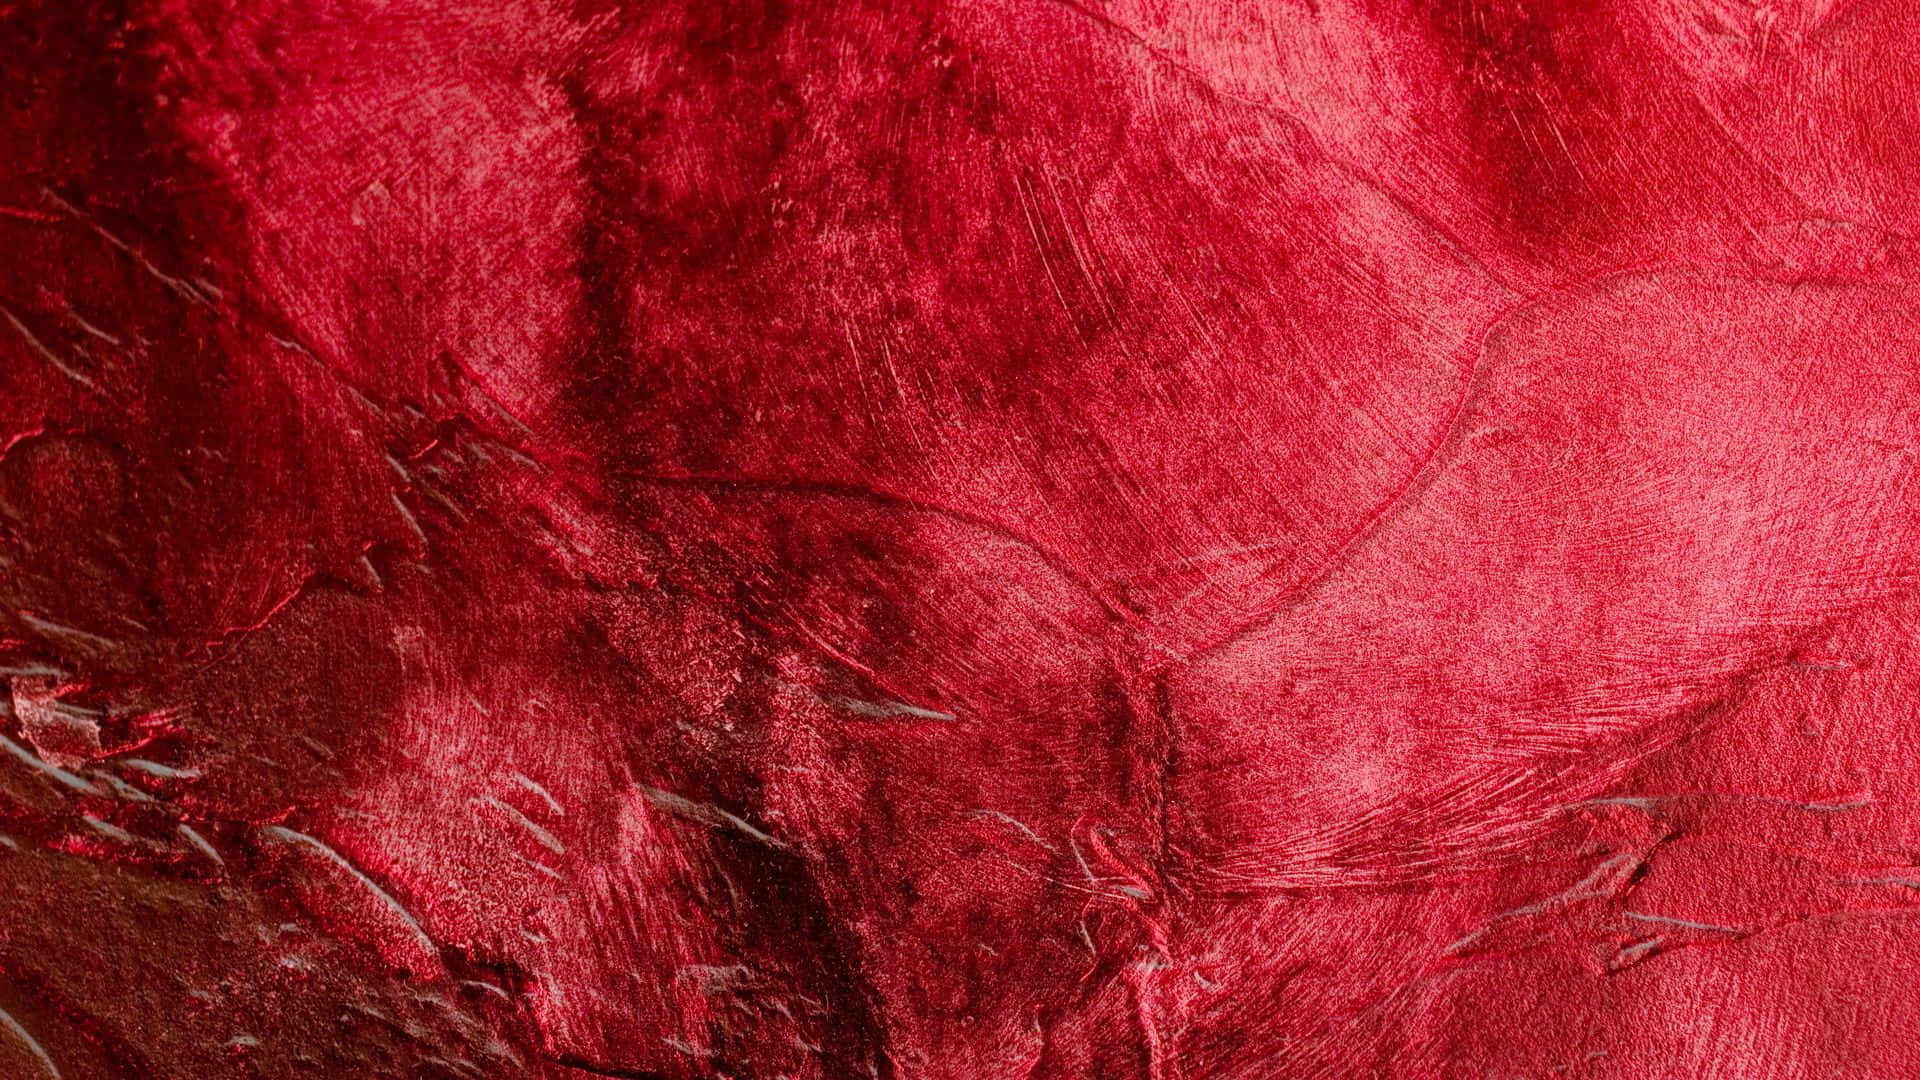 A Red Cloth With A Heart On It Wallpaper